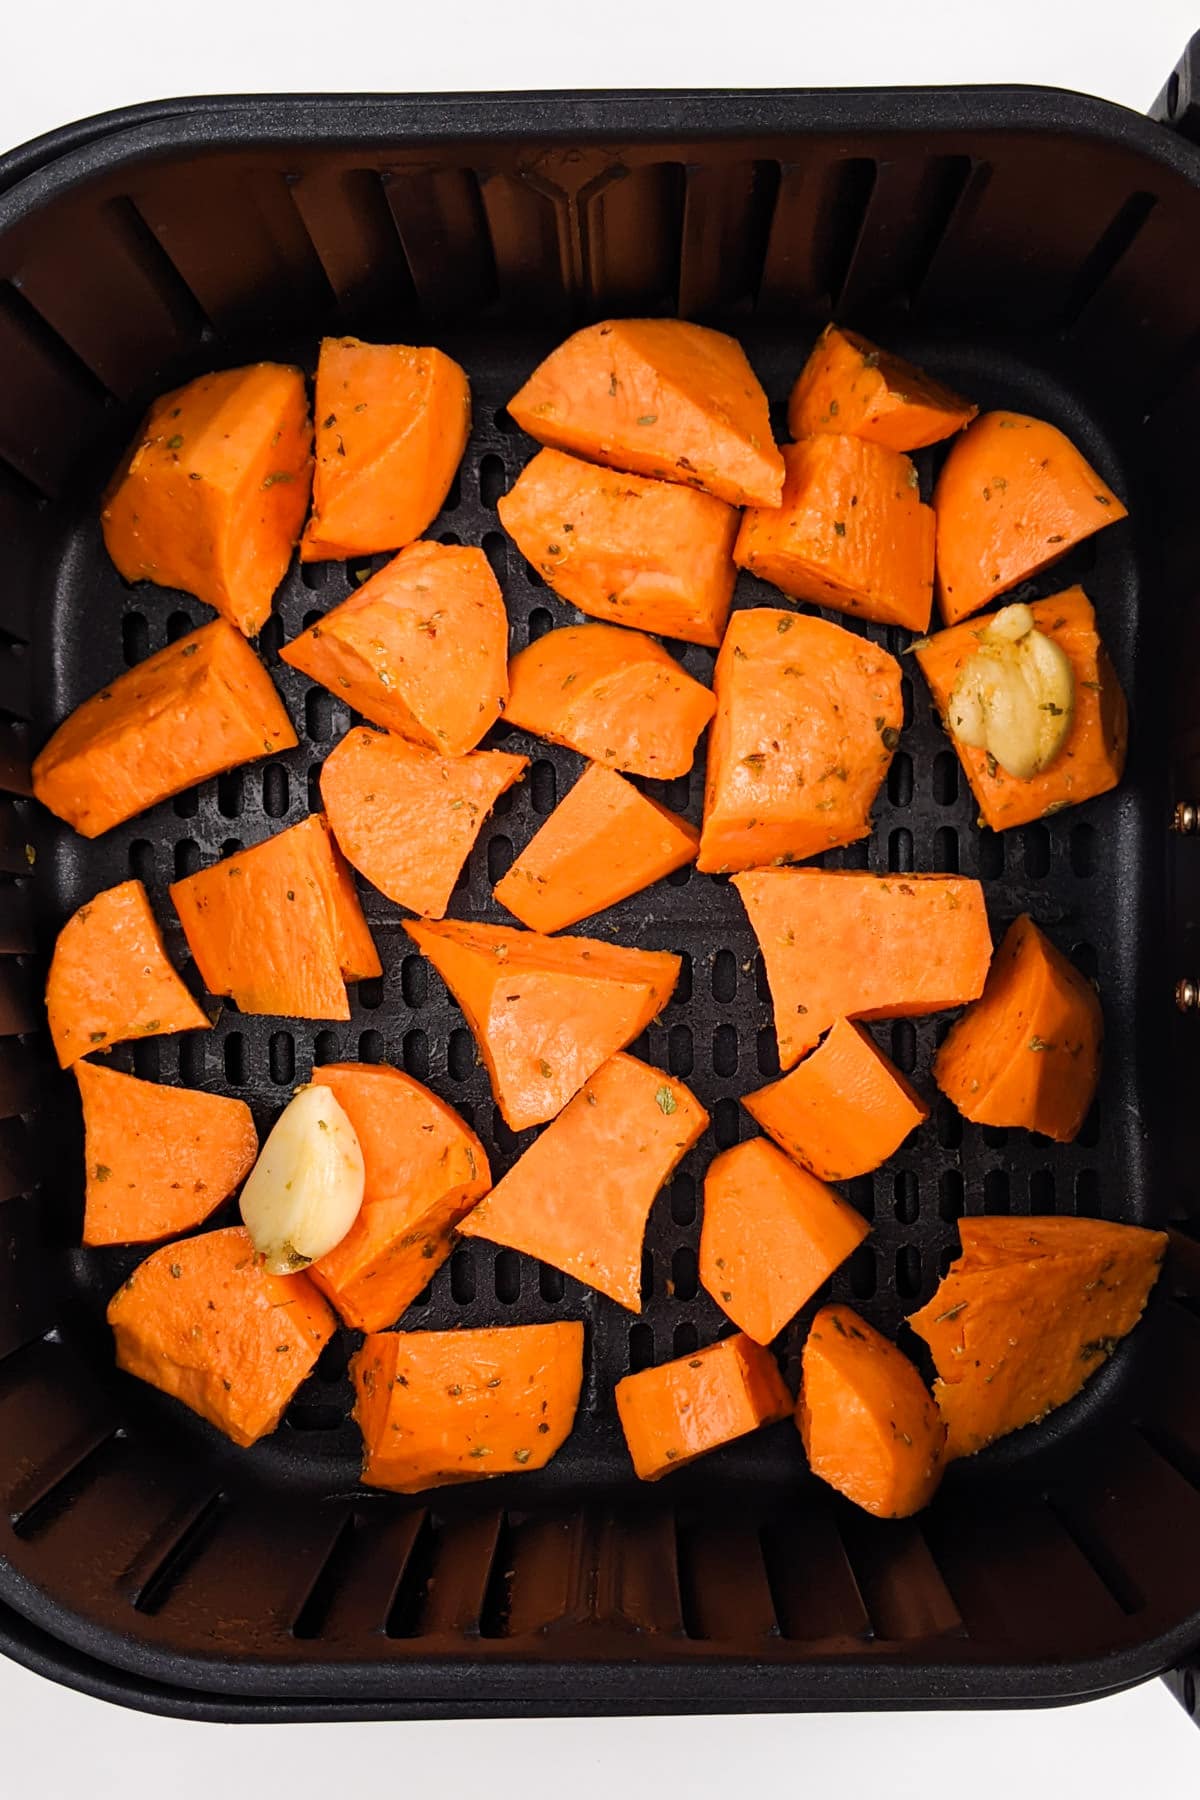 Top view of sweet potato chunks in the air fryer basket.